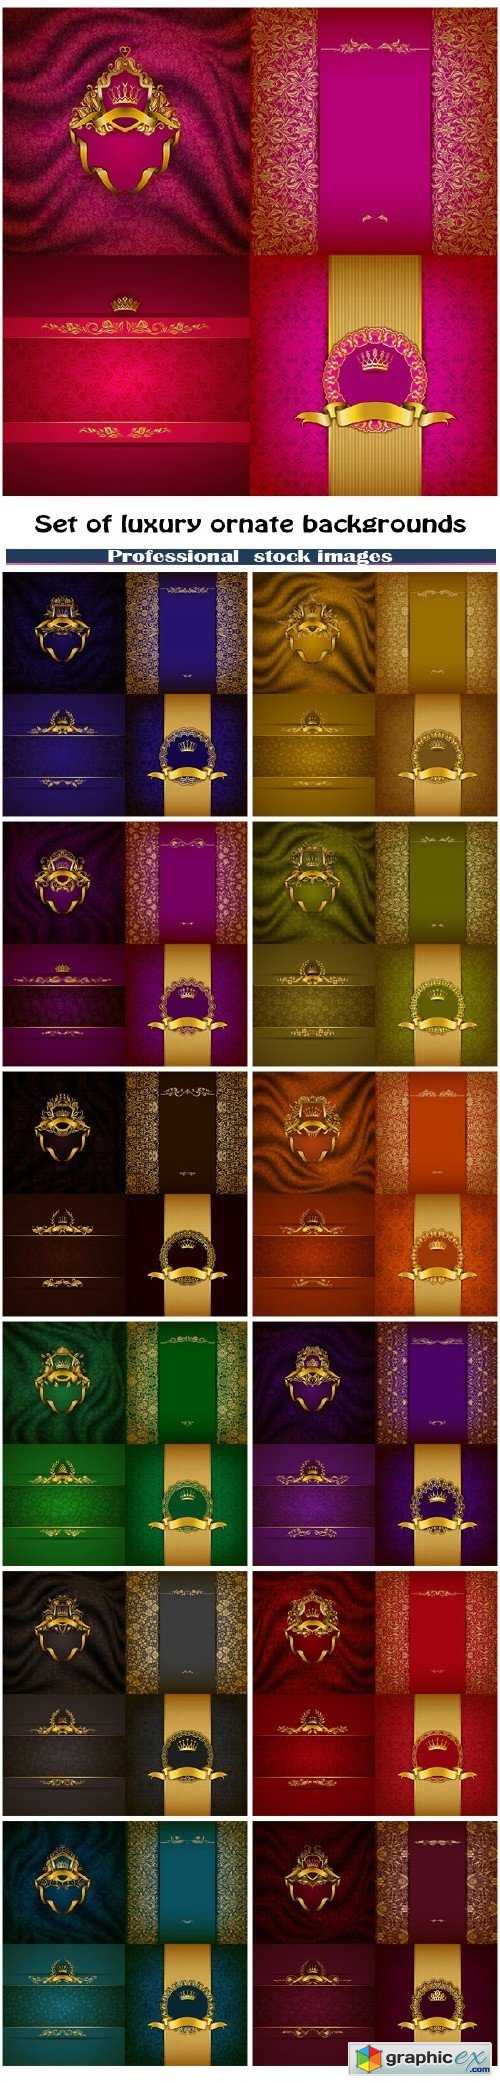 Set of luxury ornate backgrounds in vintage style